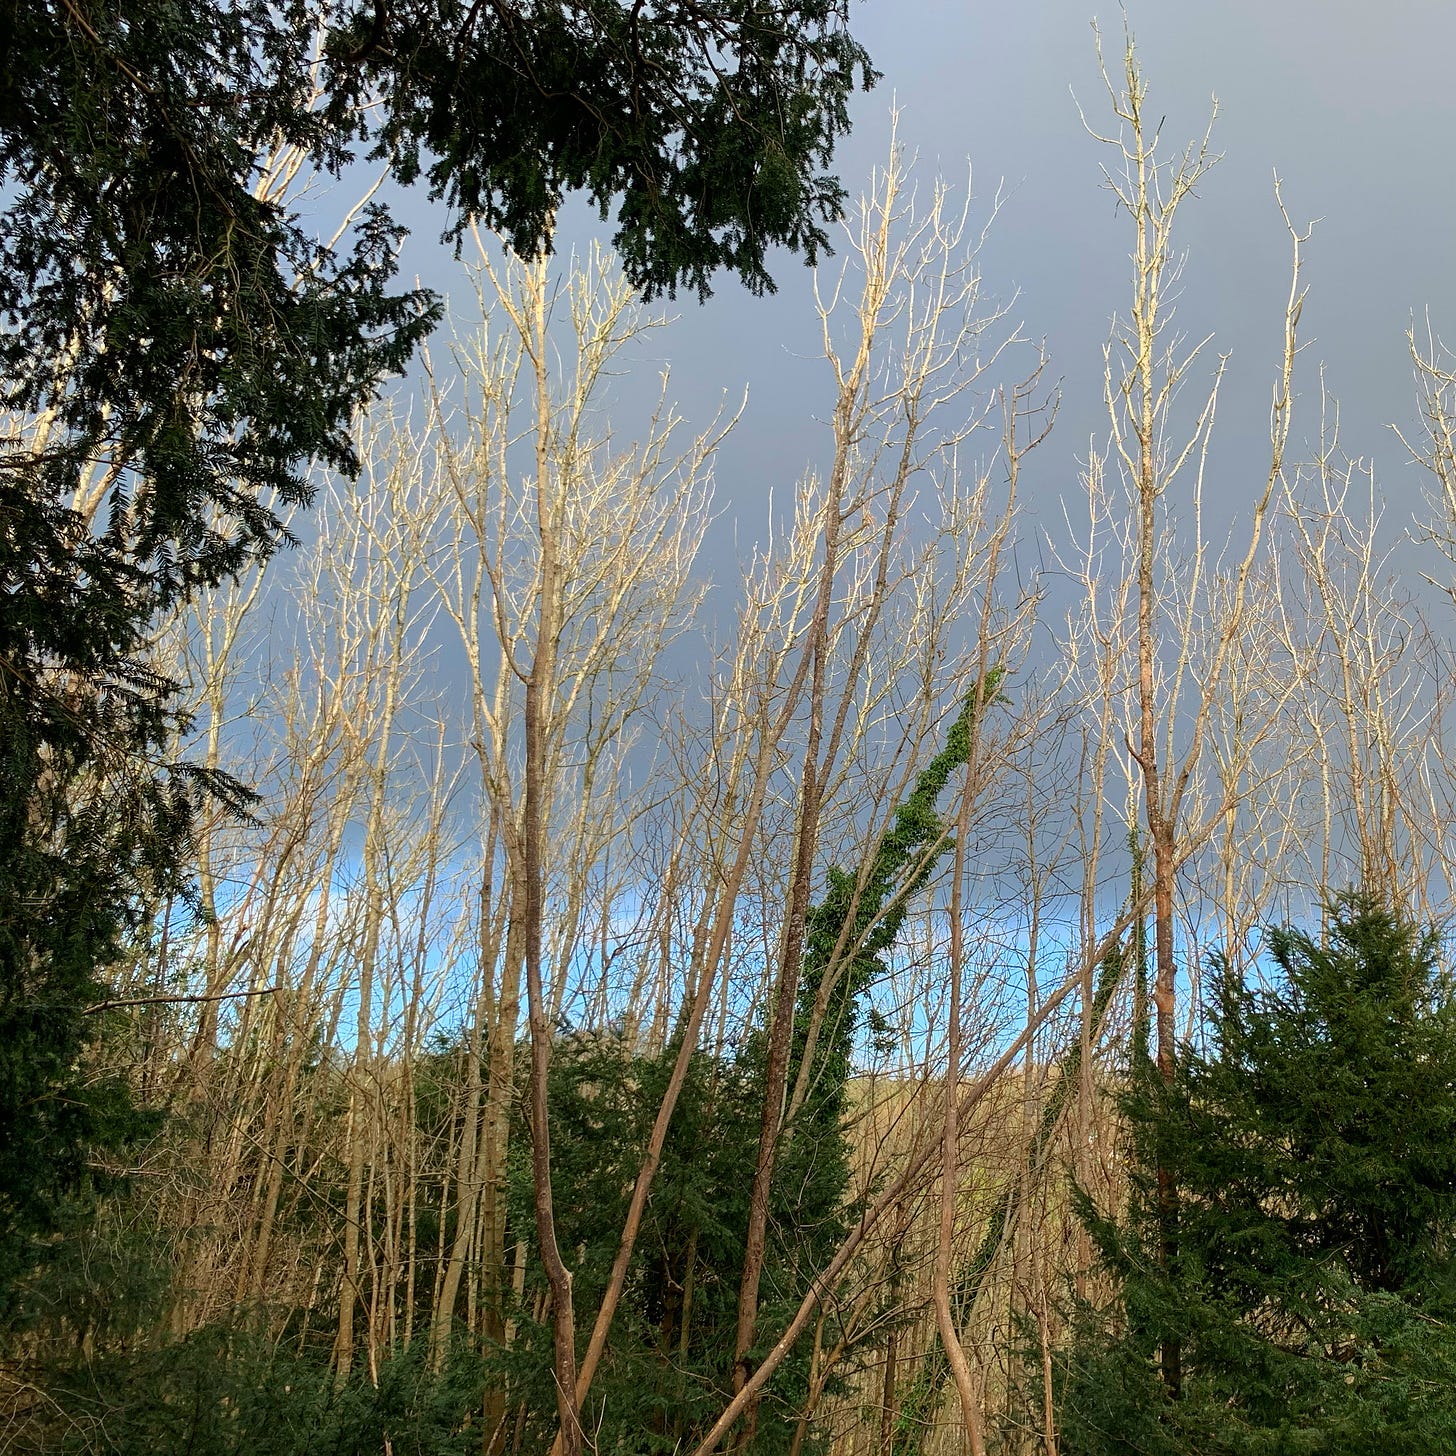 A photo of some wintry trees and grey clouds huddled over a stripe of blue sky